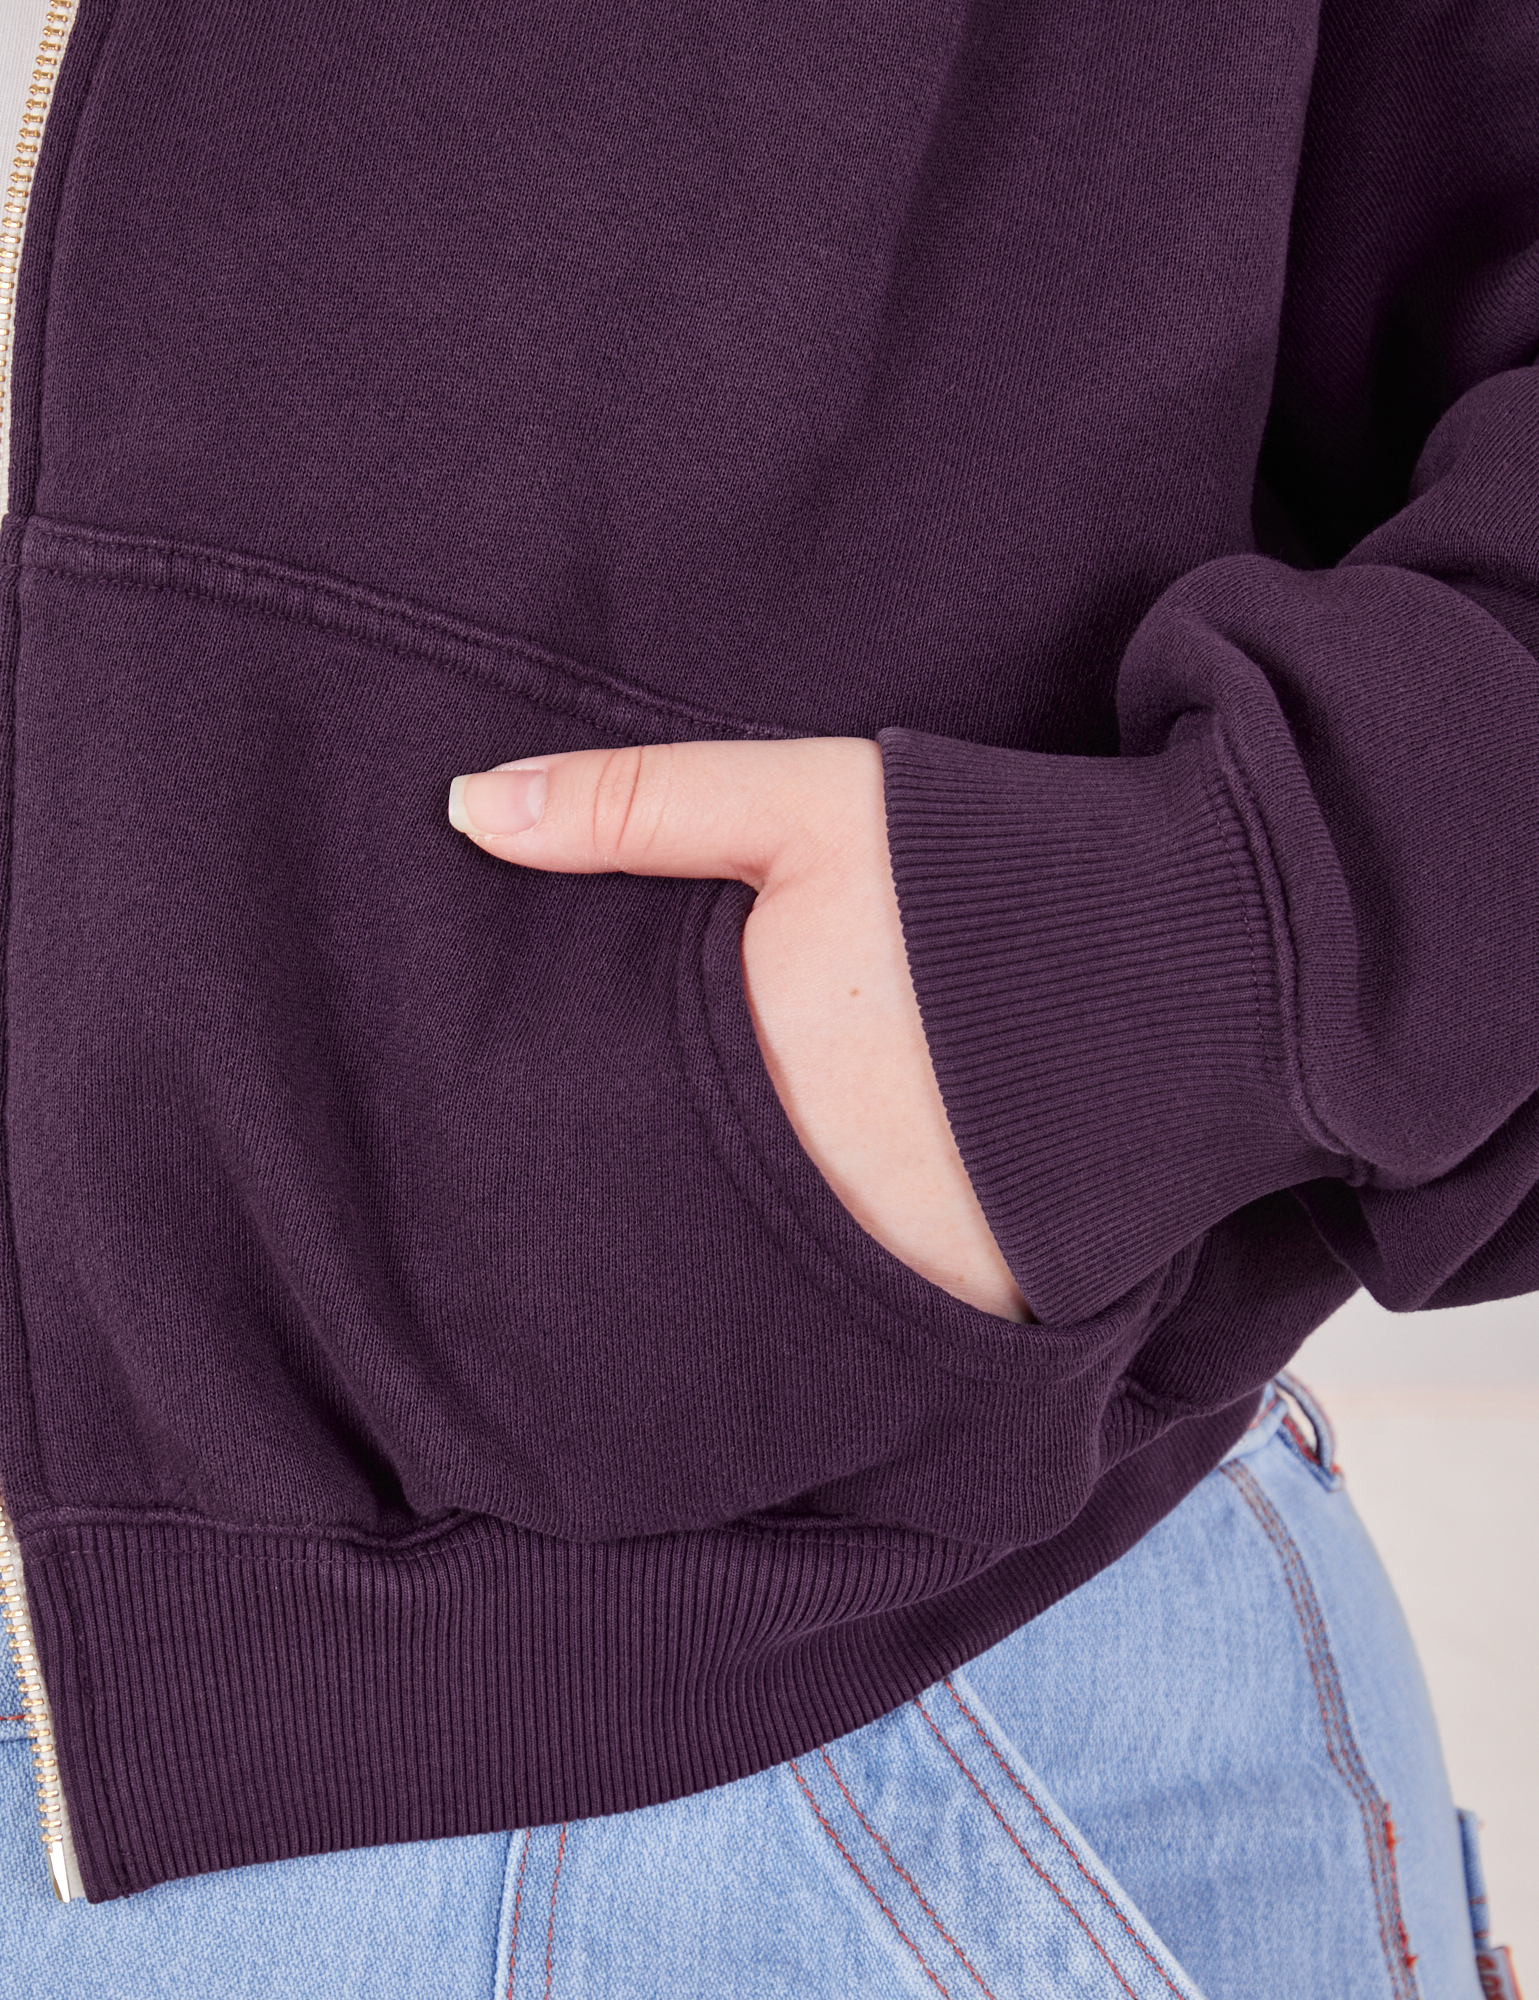 Cropped Zip Hoodie in Nebula Purple front pocket close up. Ashley has her hand in the pocket.